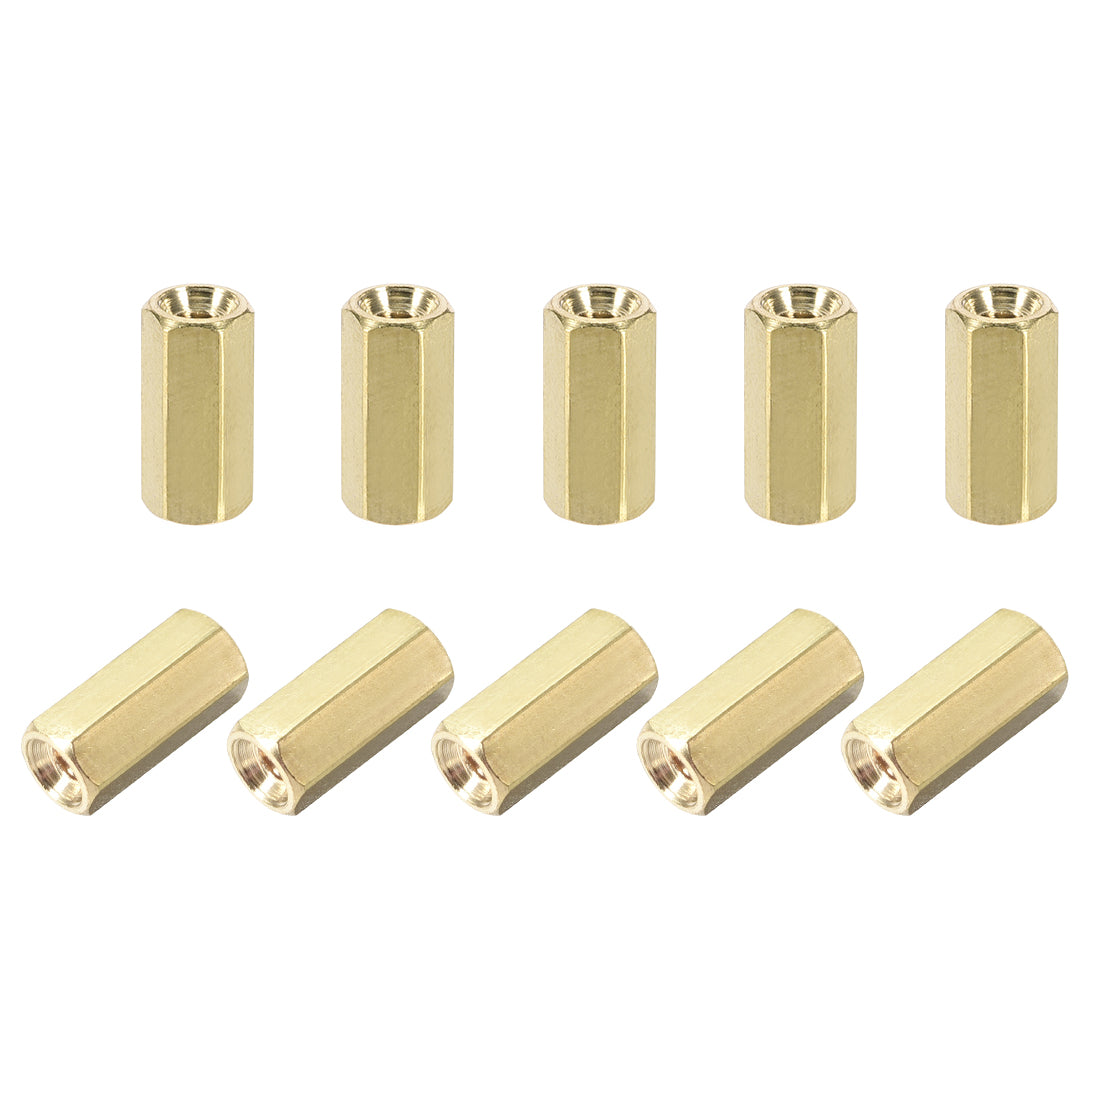 uxcell Uxcell M2.5 M5 Female to Female Hex Brass Spacer Standoff 50pcs